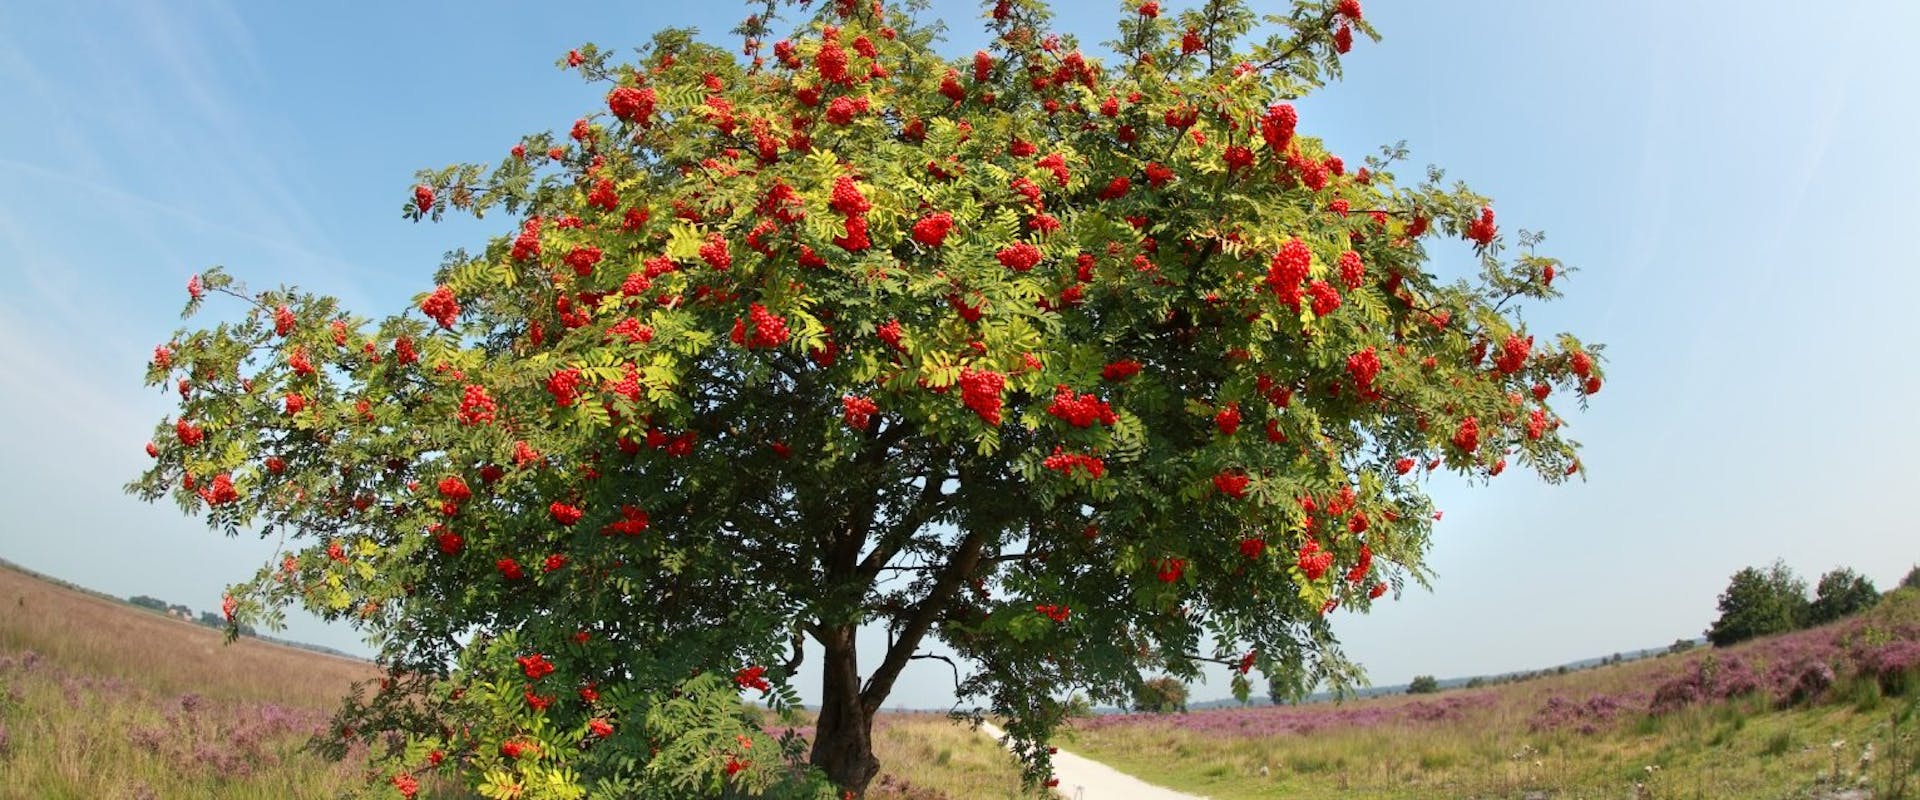 A Rowan tree with red berries.